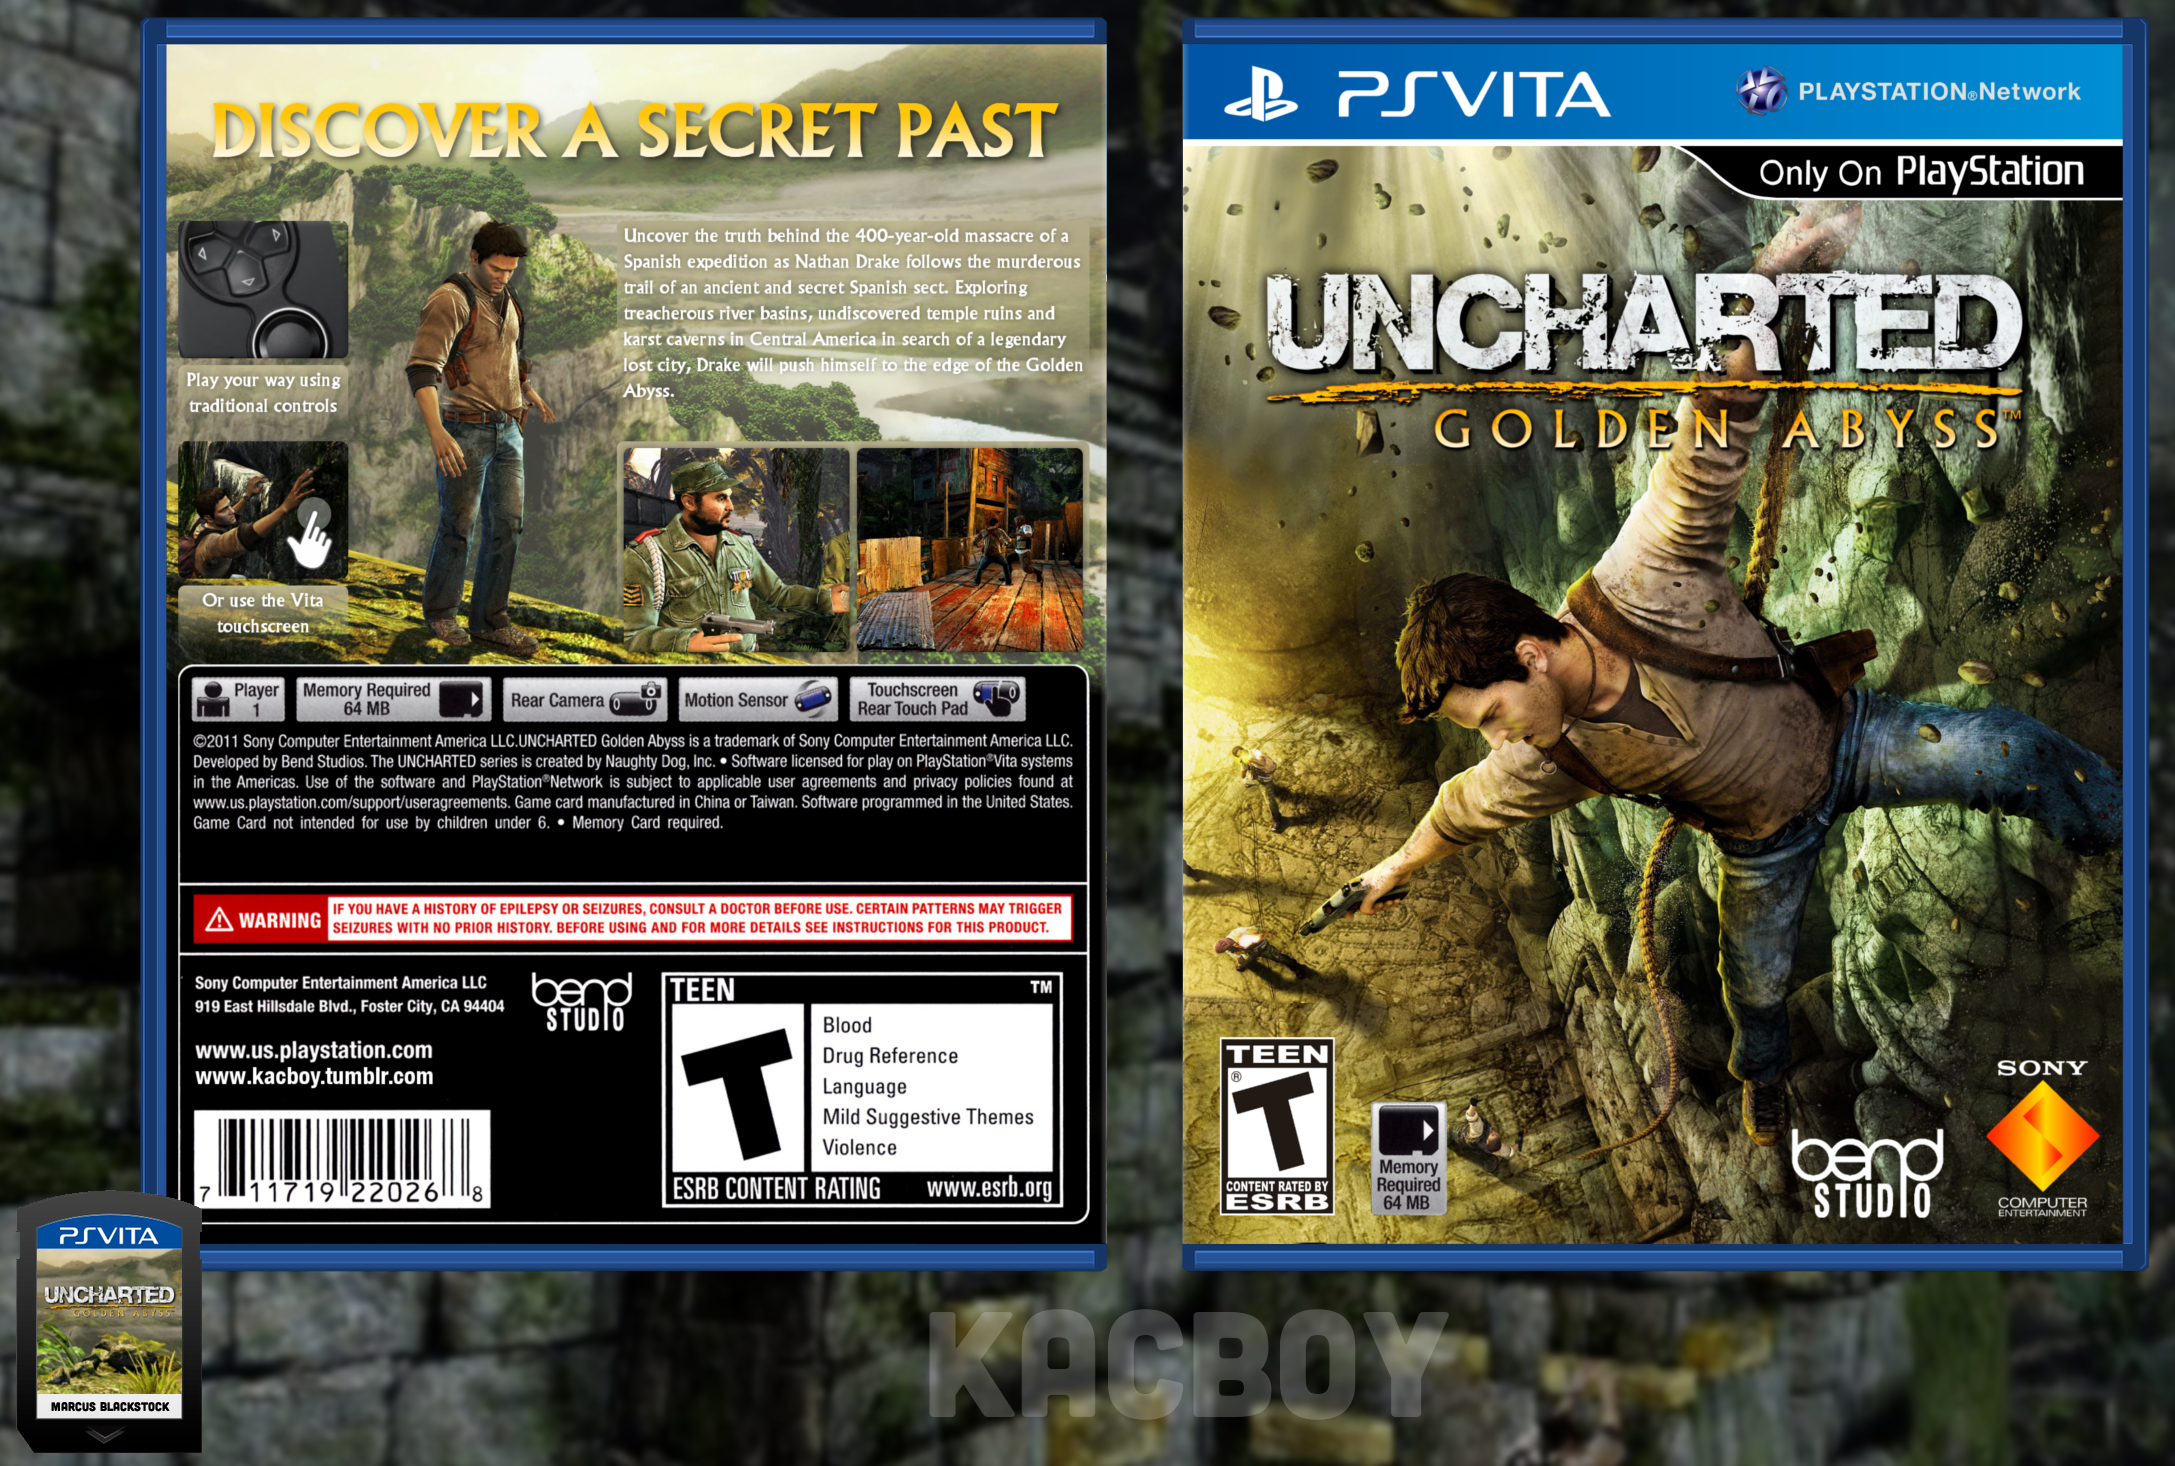 Uncharted: Golden Abyss box cover